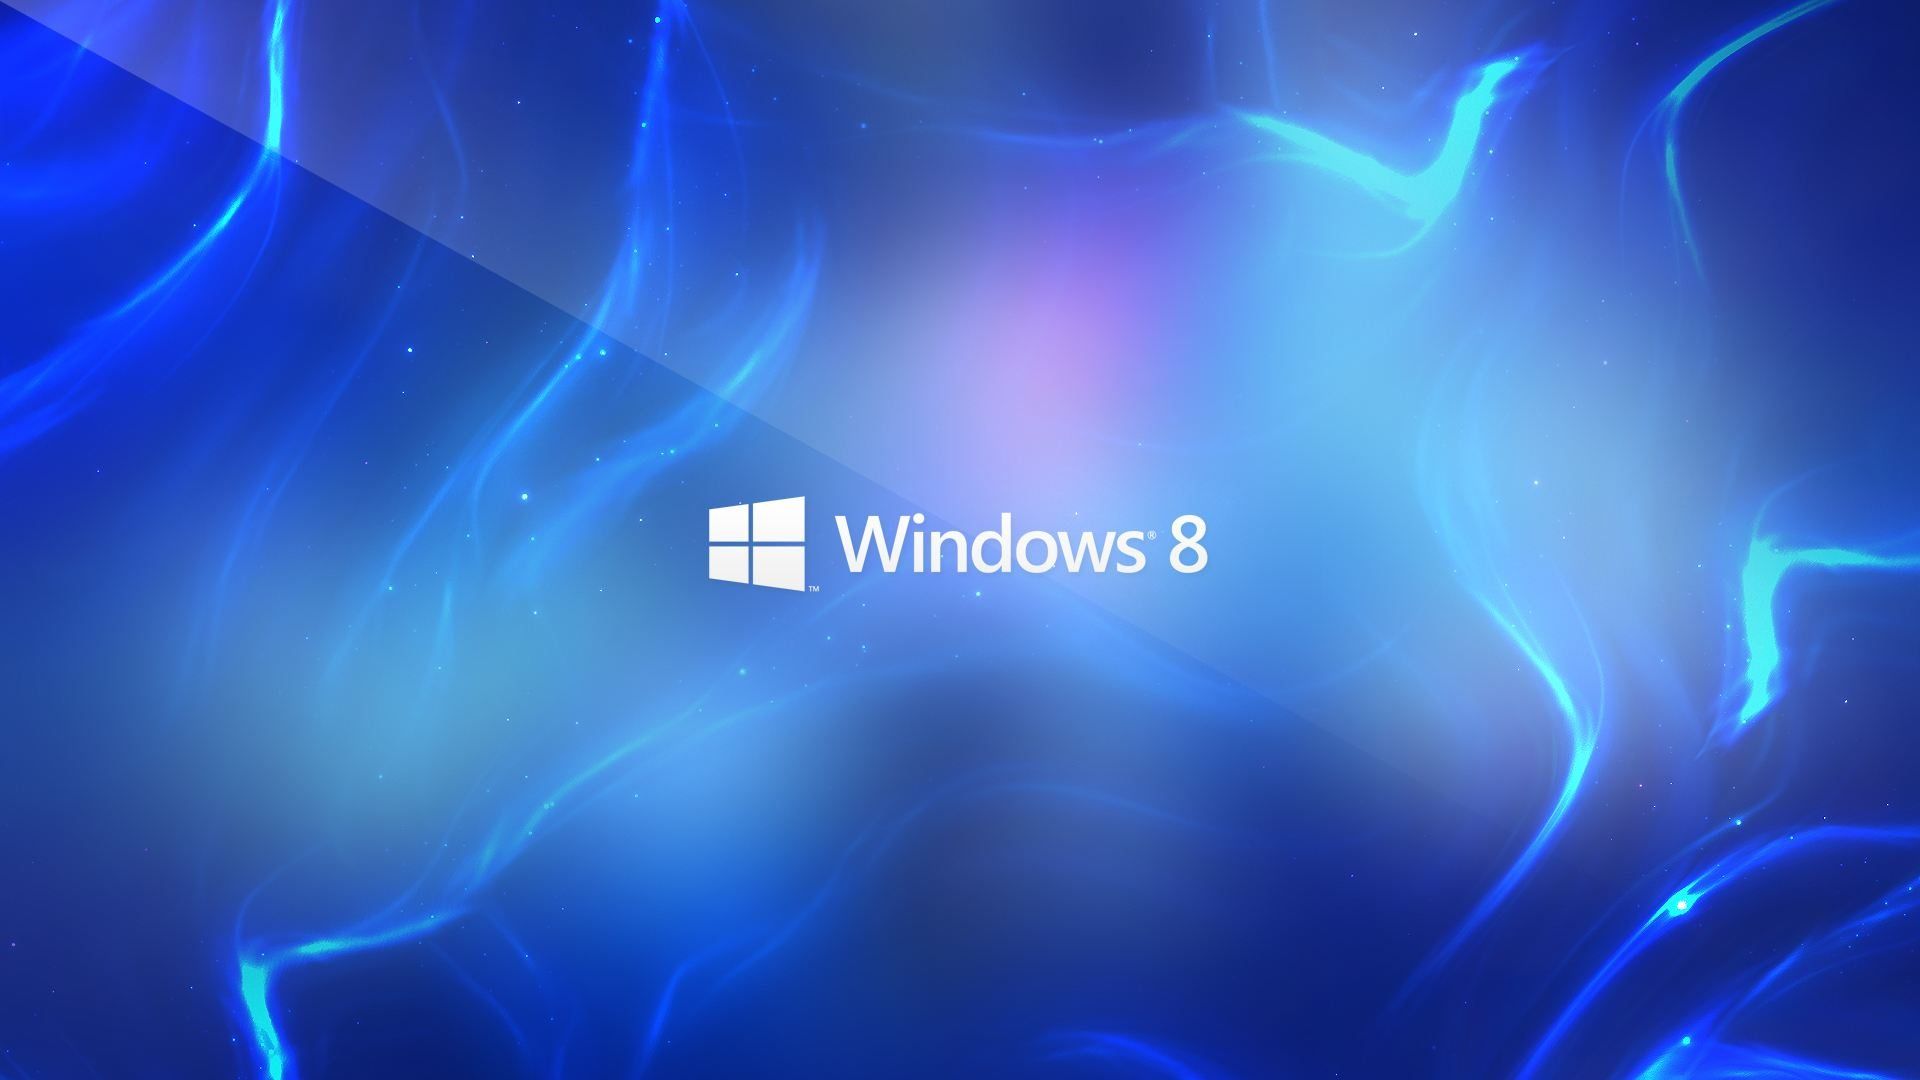 Windows 8 Wallpapers HD 1080p Free Download